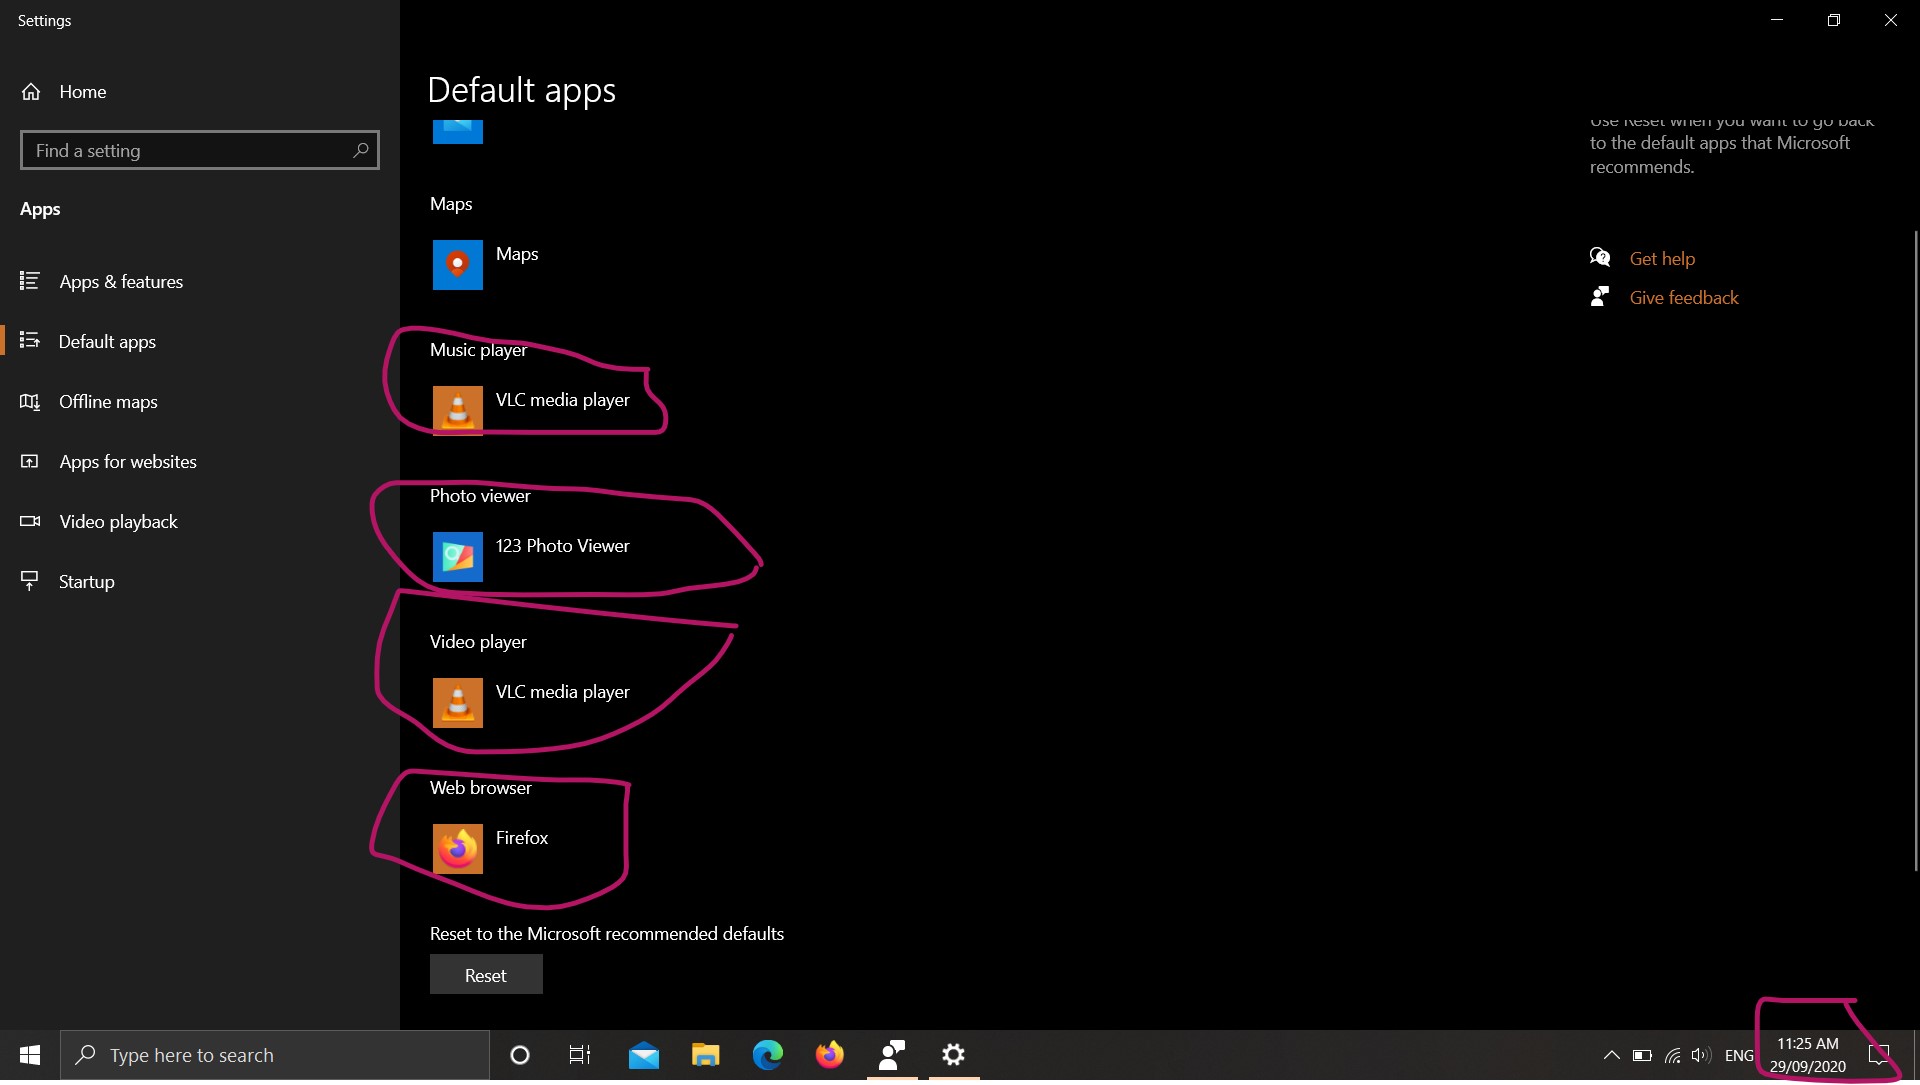 Windows 10 is automatically resetting my default applications after restart. How do I stop... d173c09f-fab9-4421-9254-cec1b221d74c?upload=true.jpg